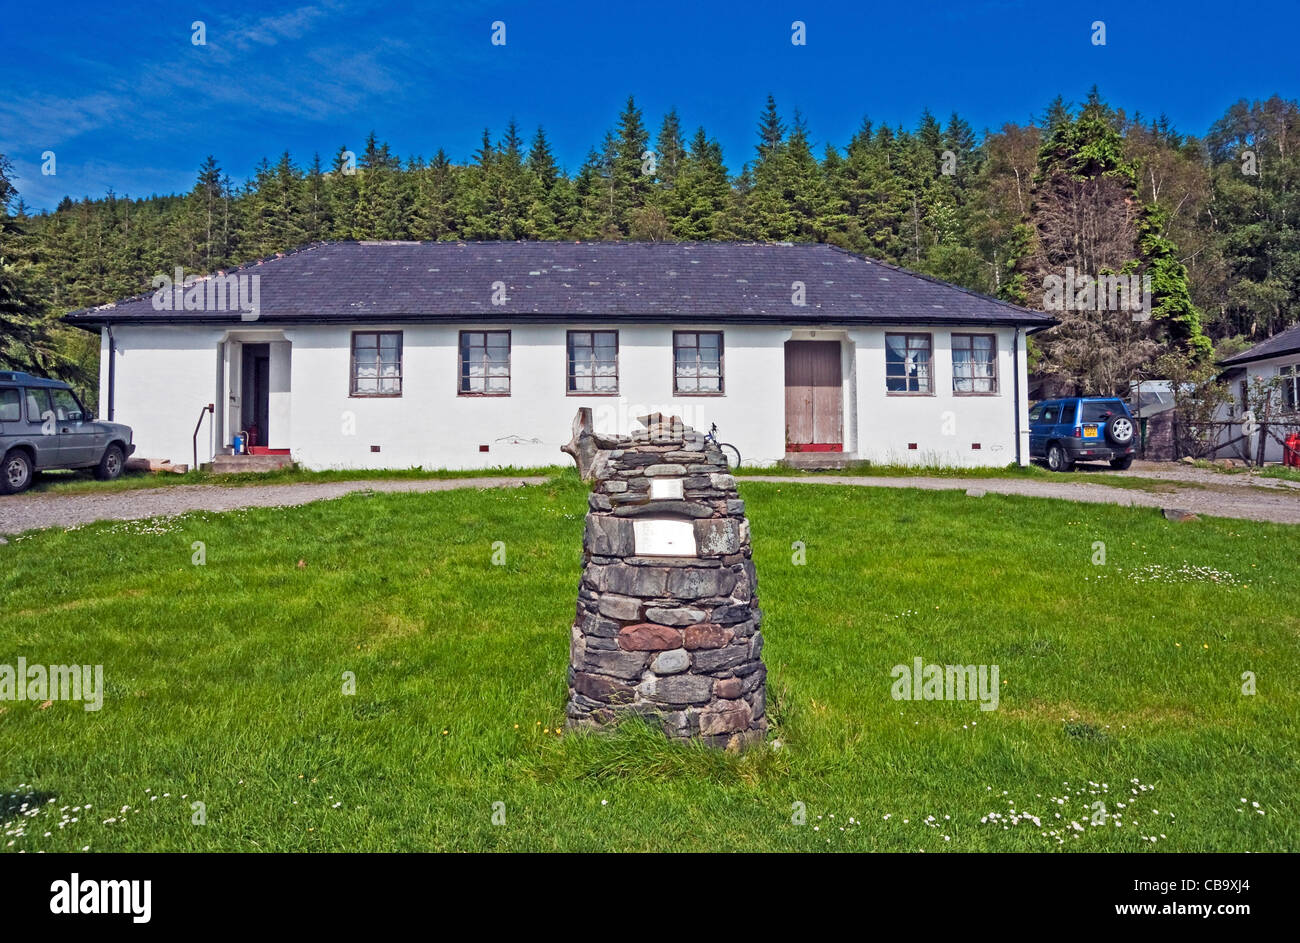 The Knoydart Land Raiders Cairn in The village of Inverie in Inverie Bay Loch Nevis on Knoydart the West Highlands of Scotland Stock Photo